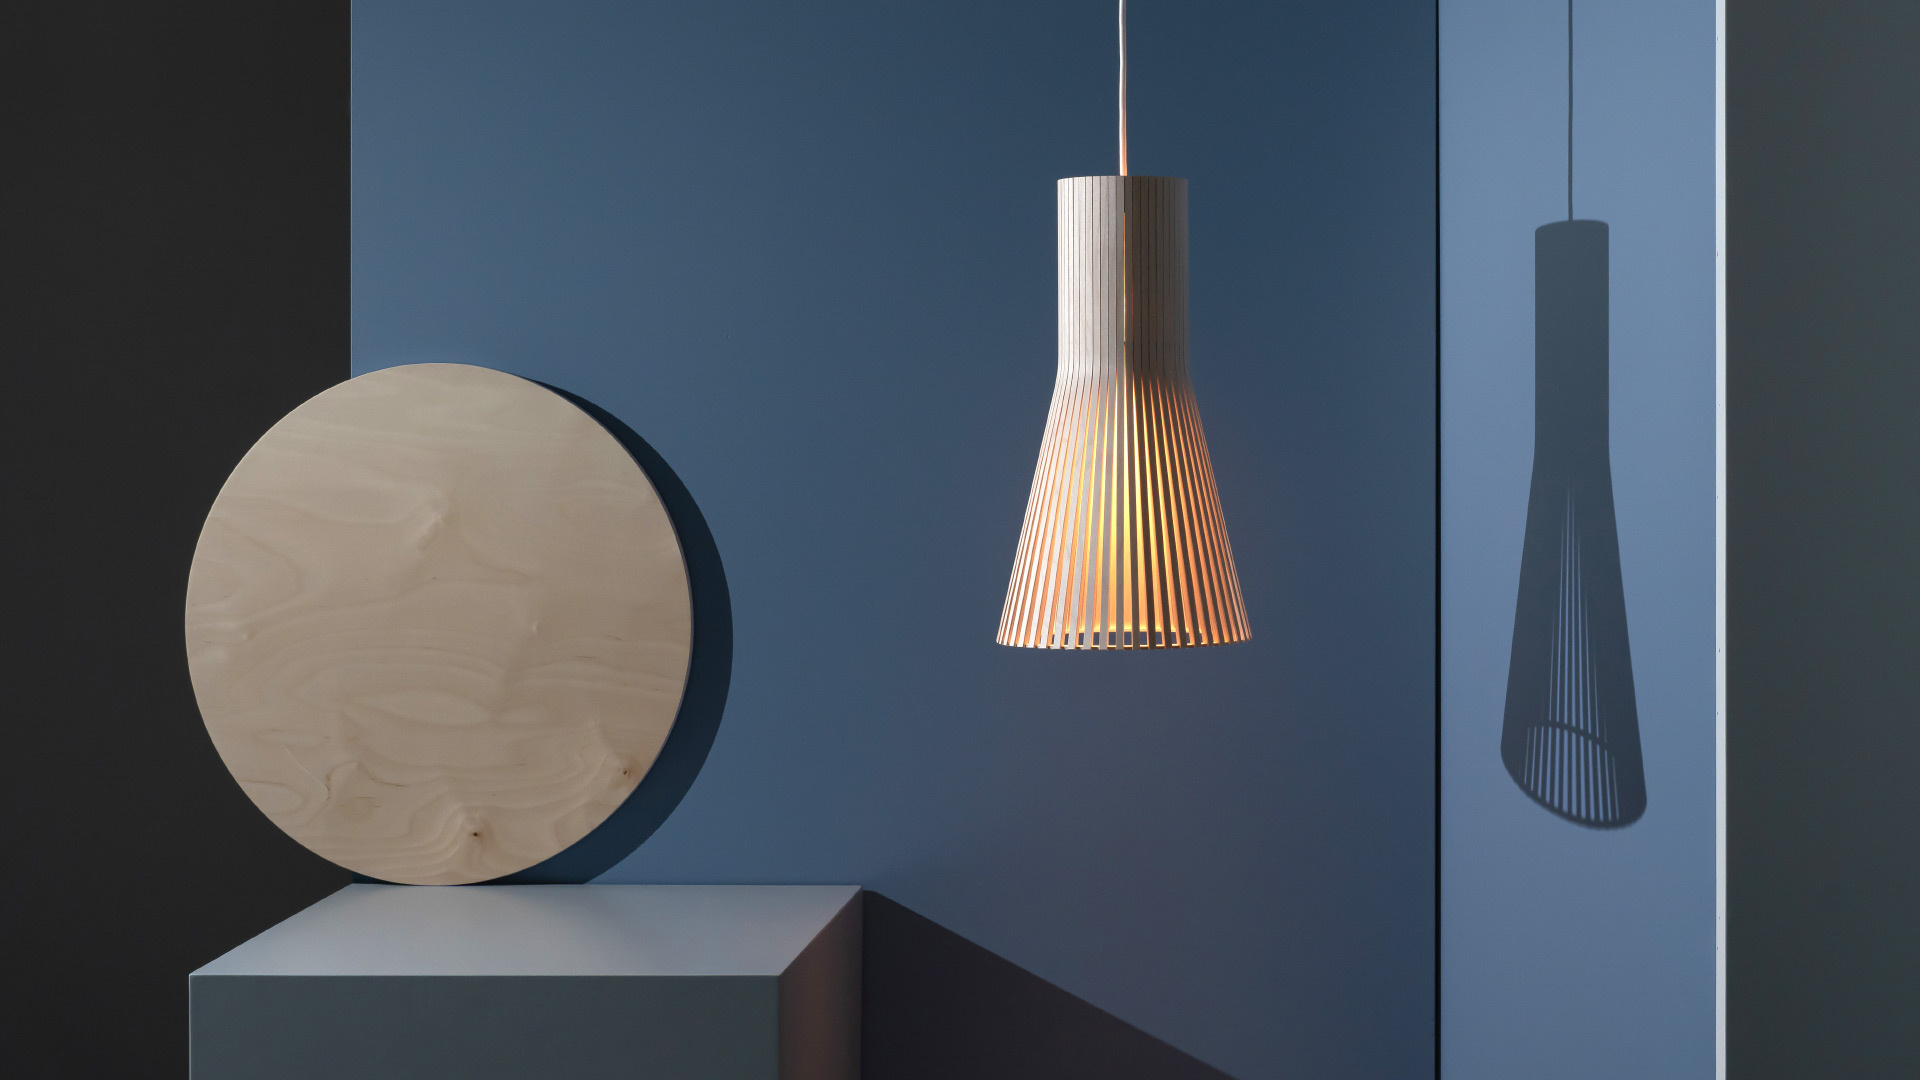 Wooden Secto 4201 pendant lamp by Secto Design Secto Design